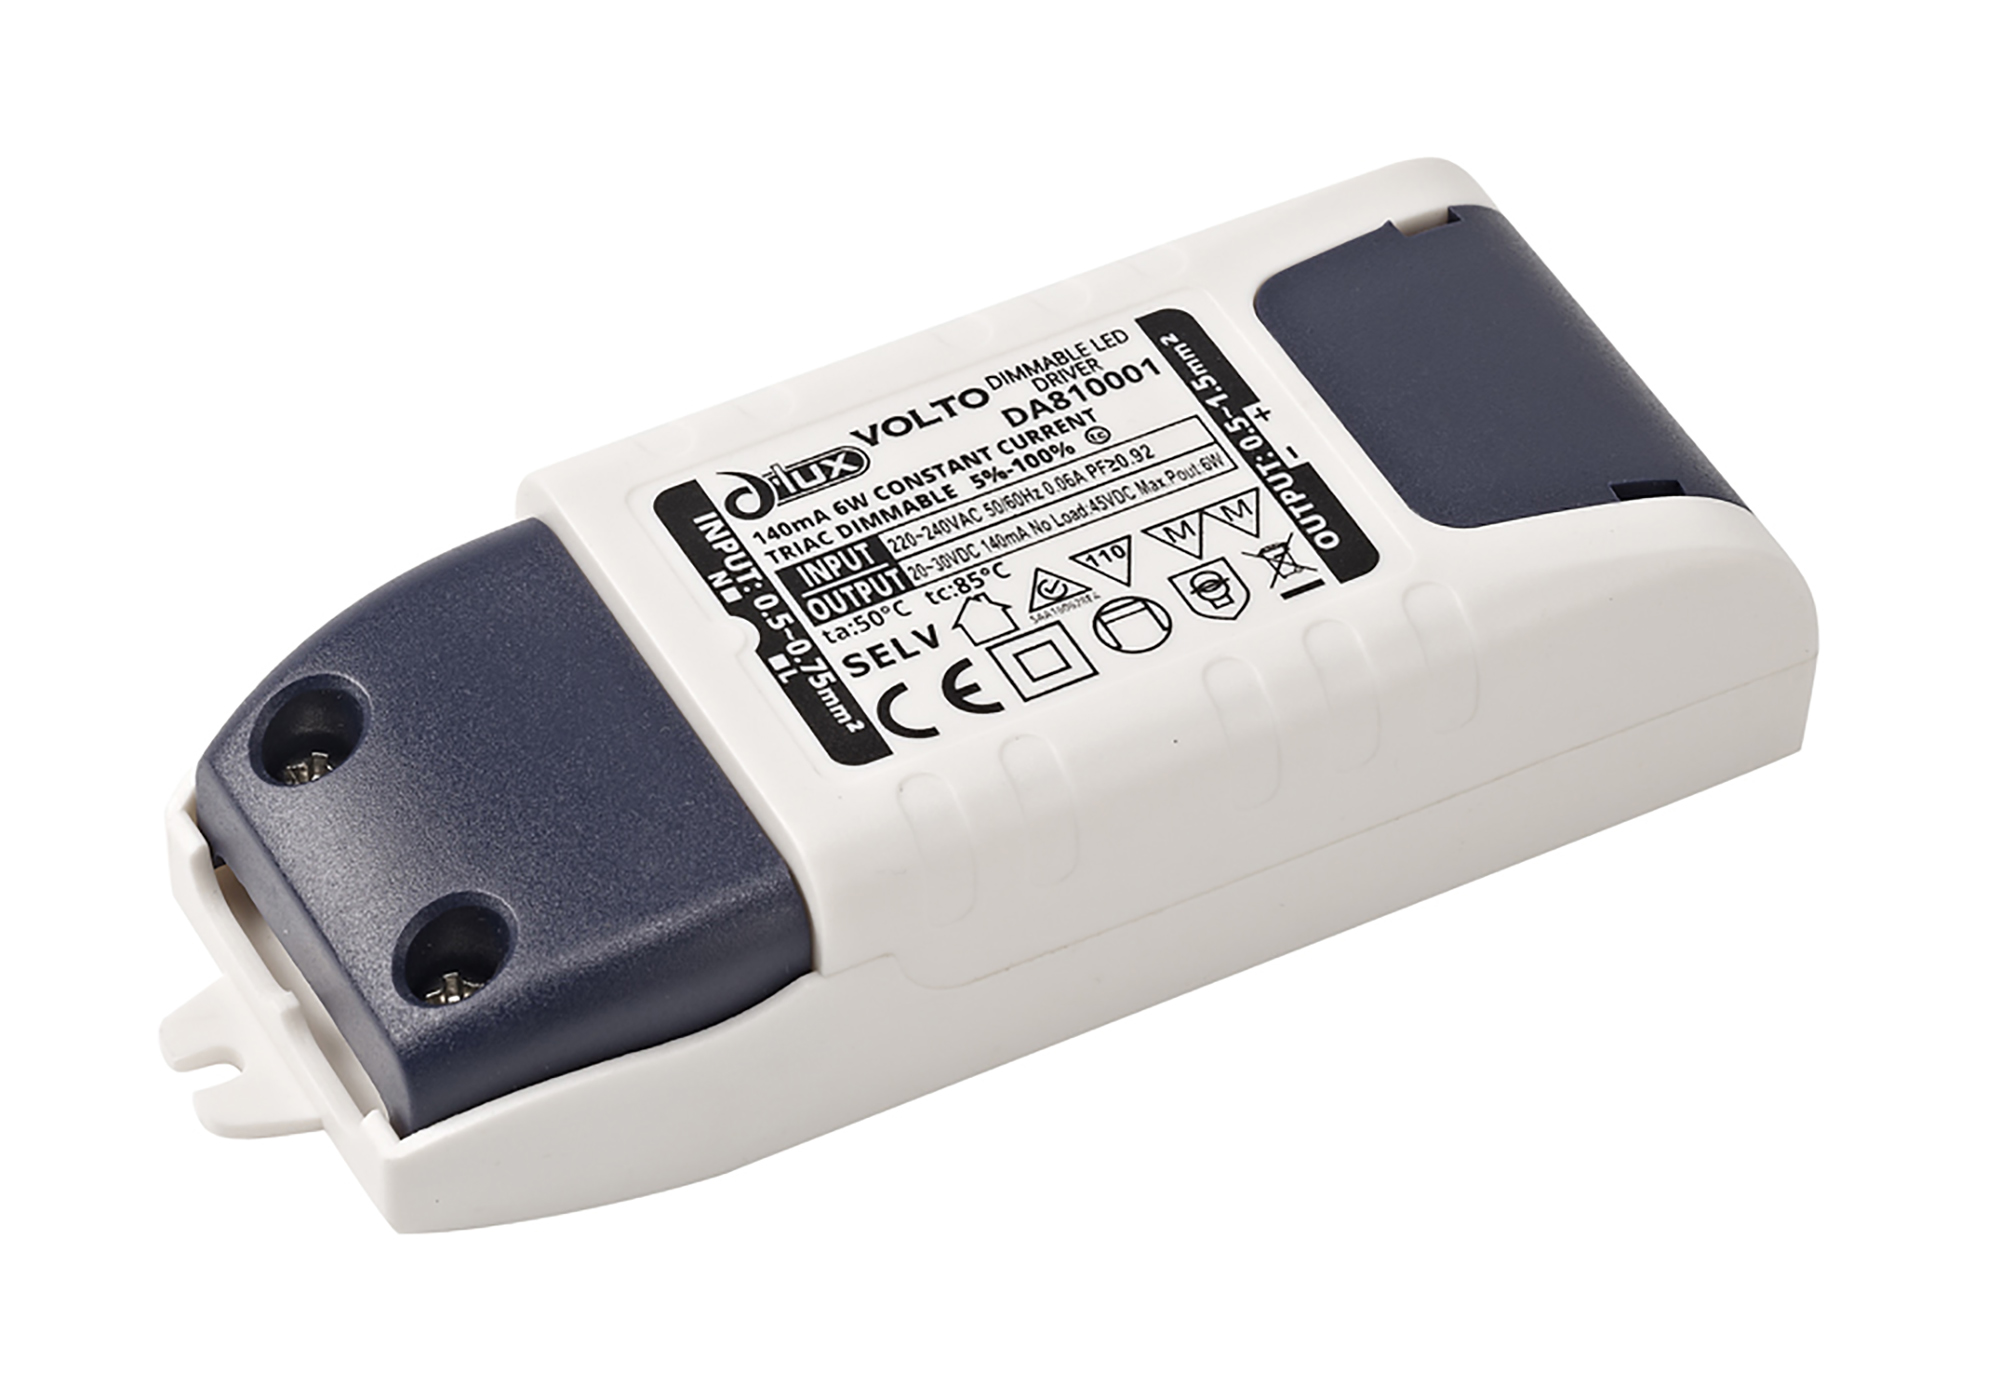 Volto Drivers Dlux Phase cut Driver